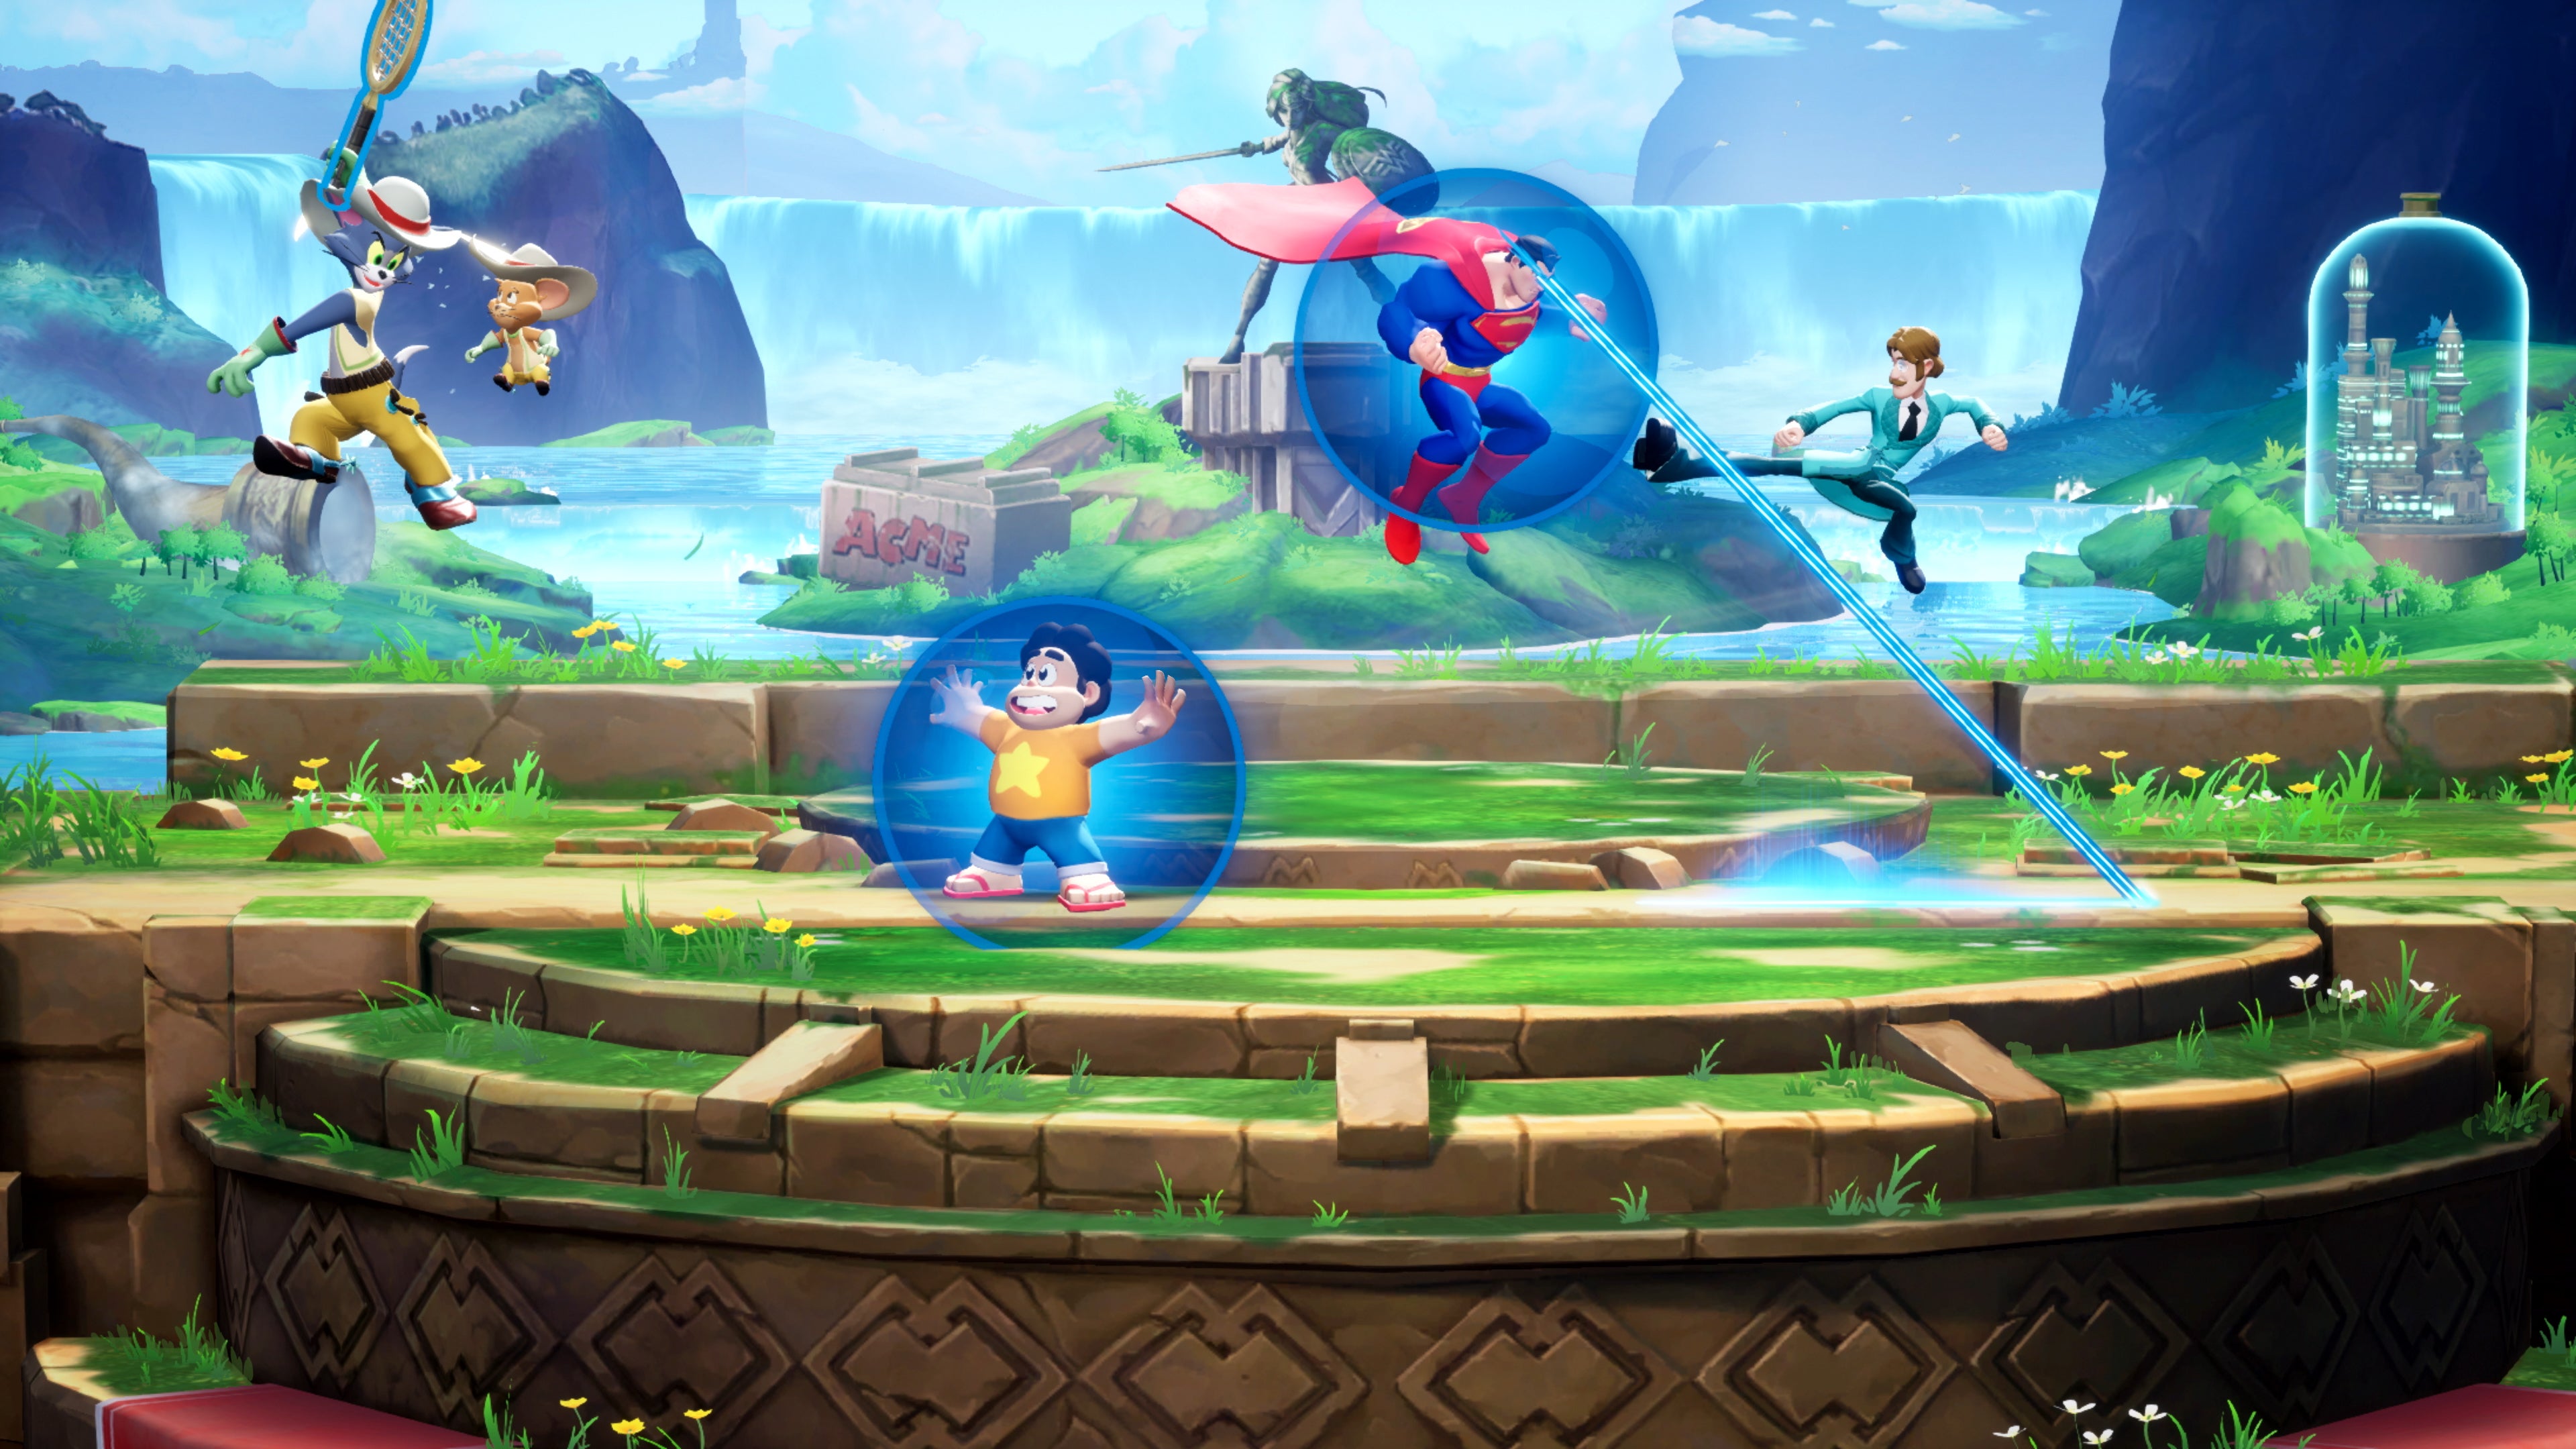 Superman, Shaggy, Steven Universe, and Tom & Jerry fight in a MultiVersus screenshot.